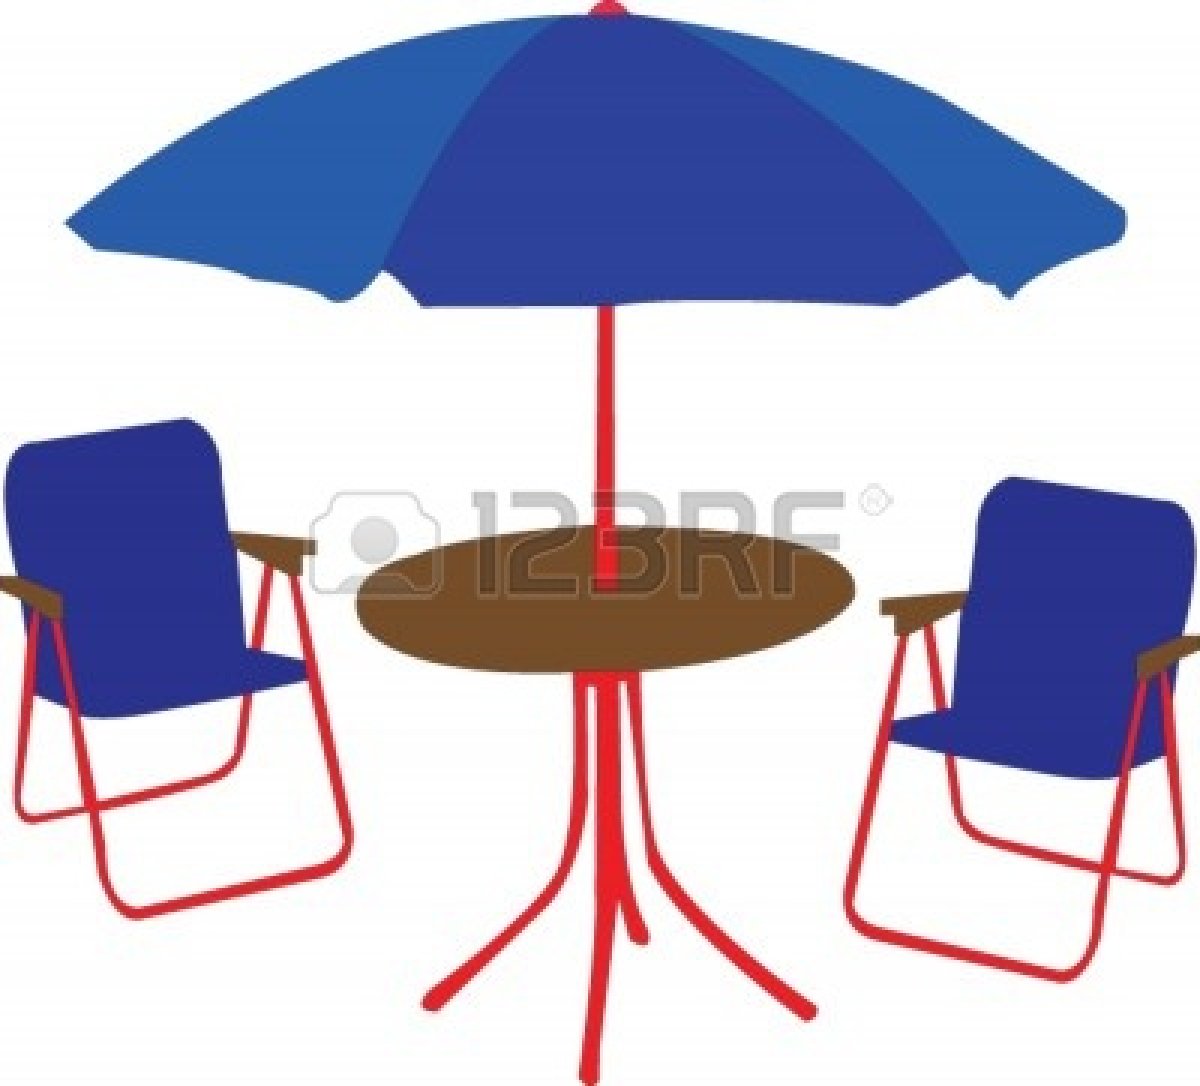 Patio Table With Umbrella Clipart   Free Clip Art Images